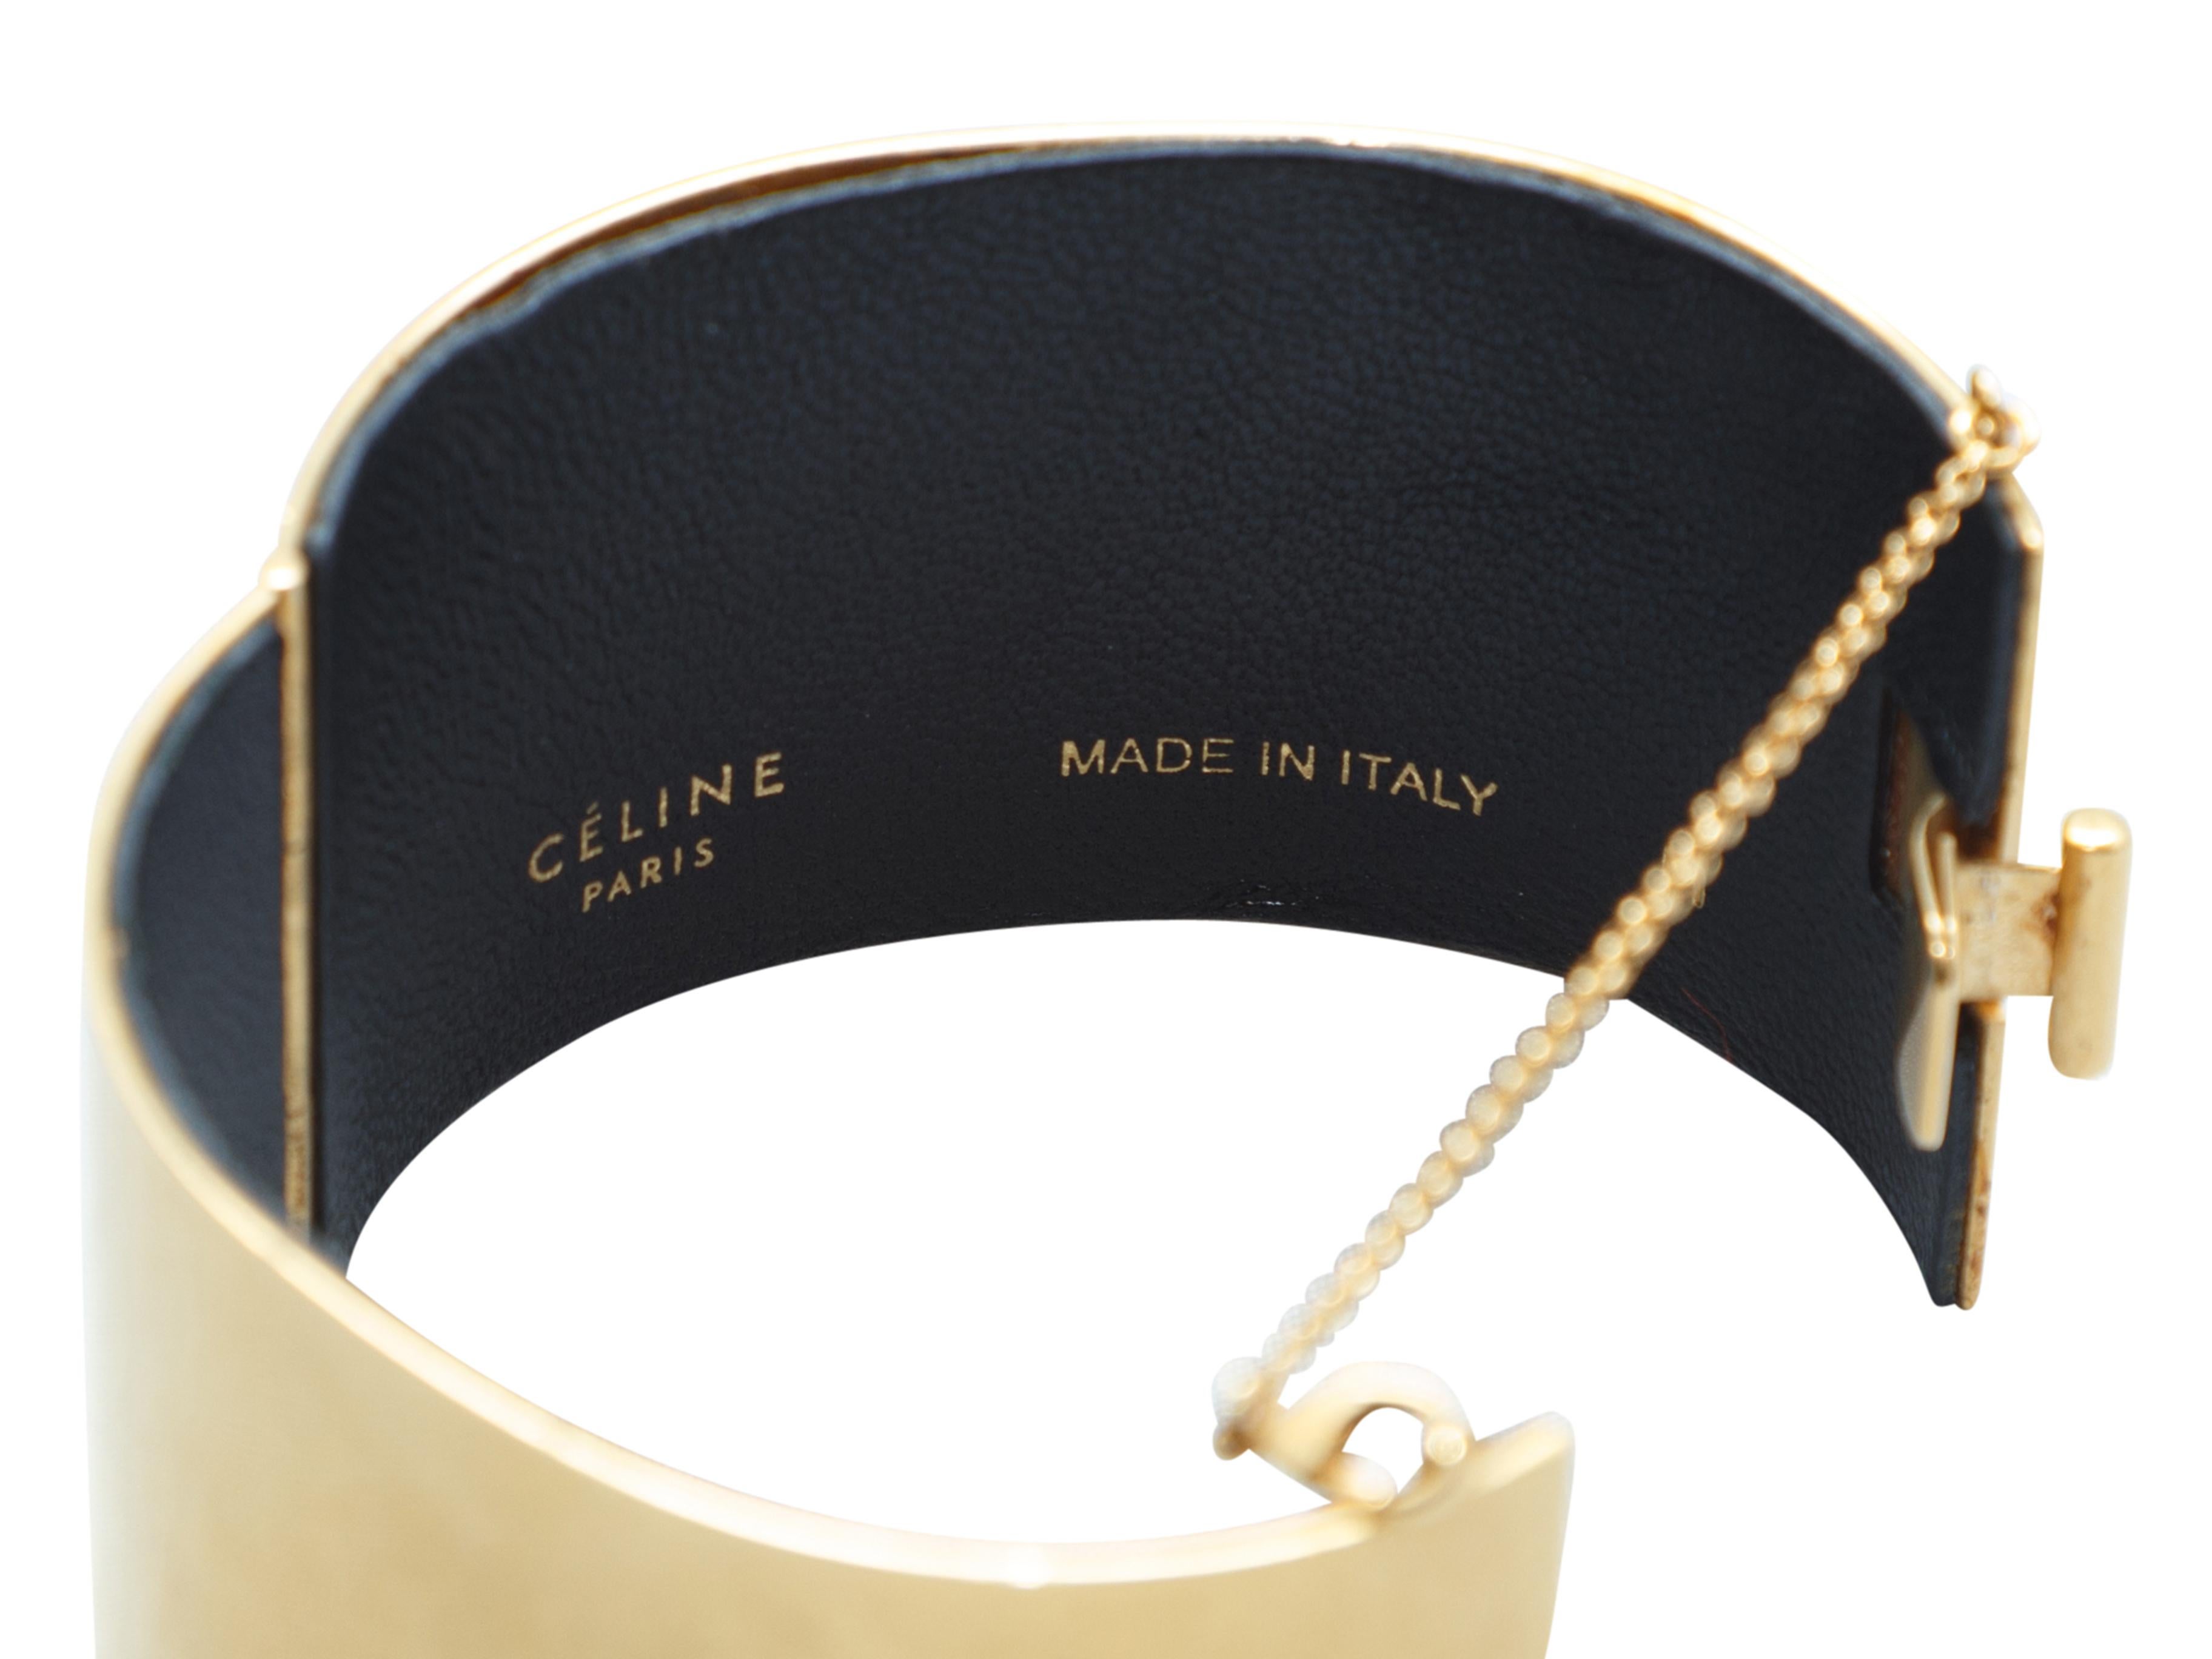 Product details: Gold-tone Edge cuff bracelet by Celine. Black leather at interior. Clasp closure featuring safety chain. 2